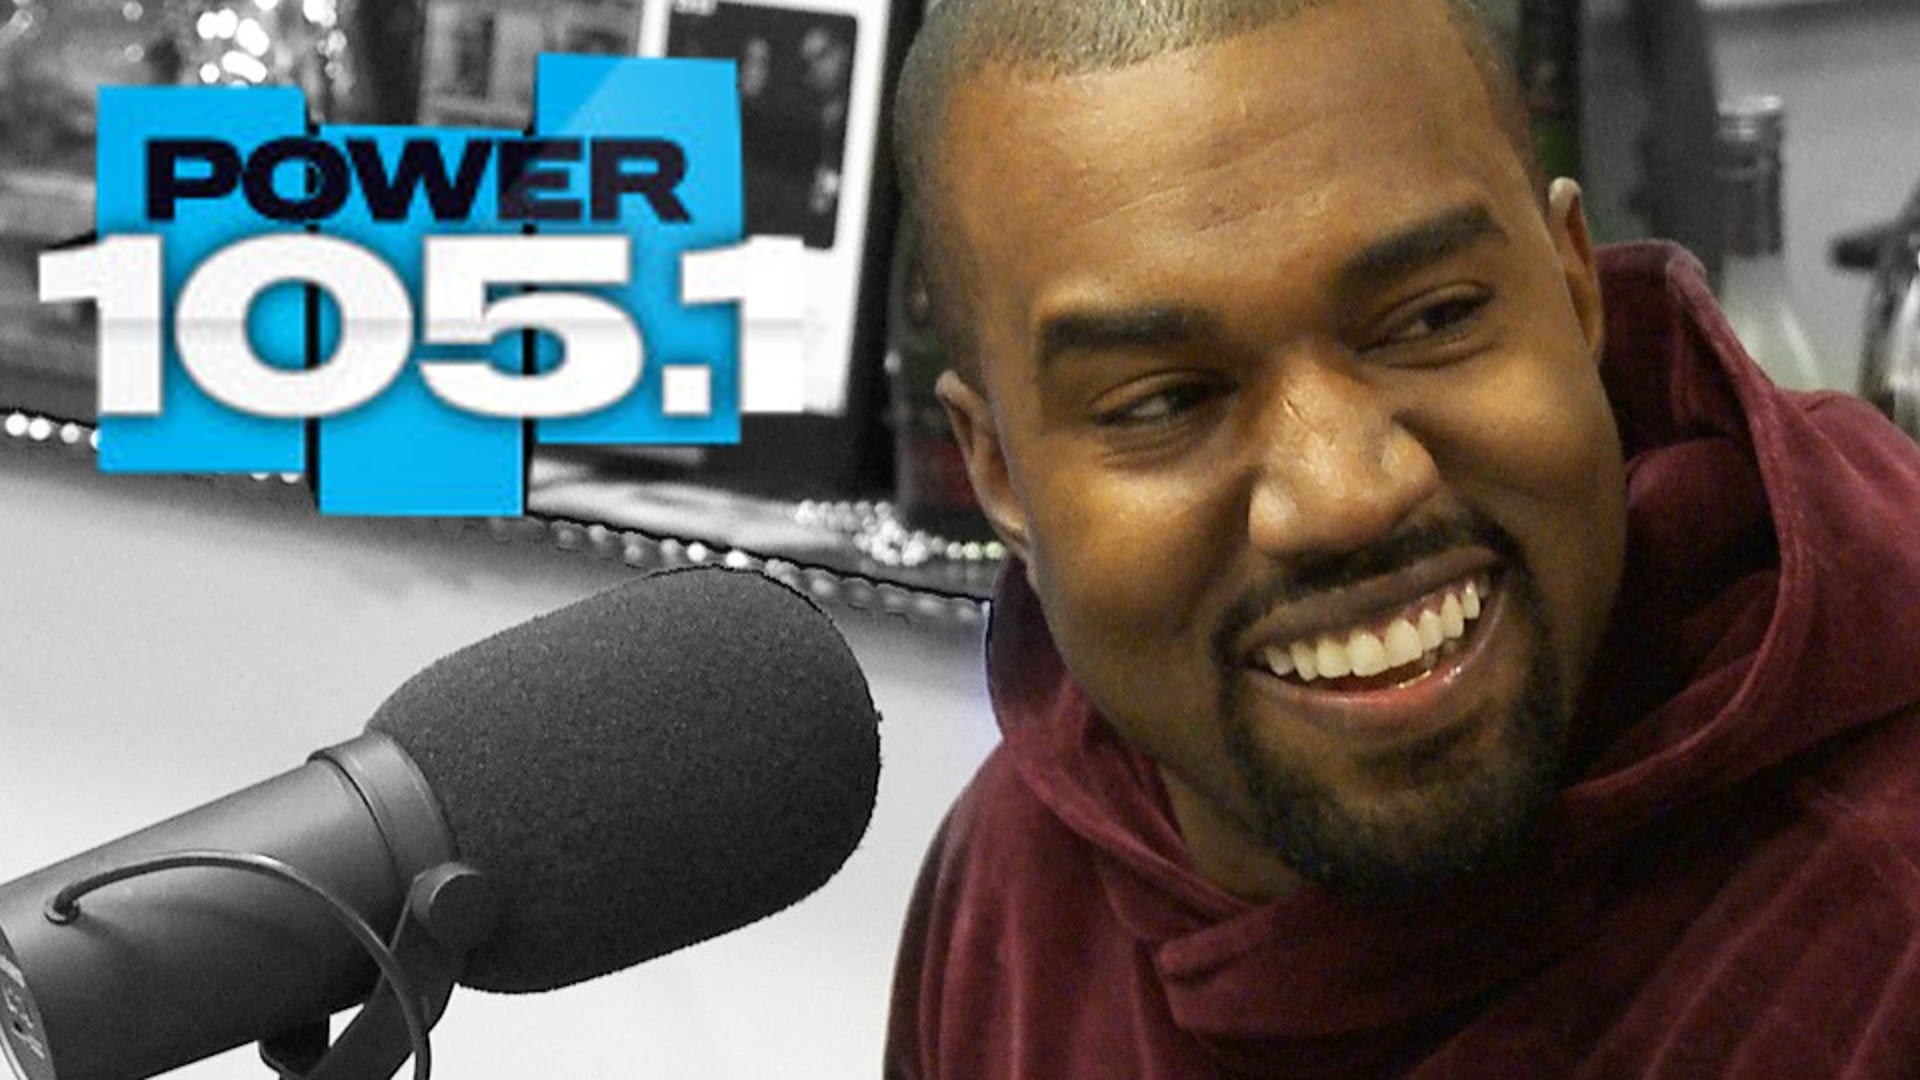 Kanye West Interview | The Breakfast Club Power 105.1 | February 20, 2015 | FULL INTERVIEW